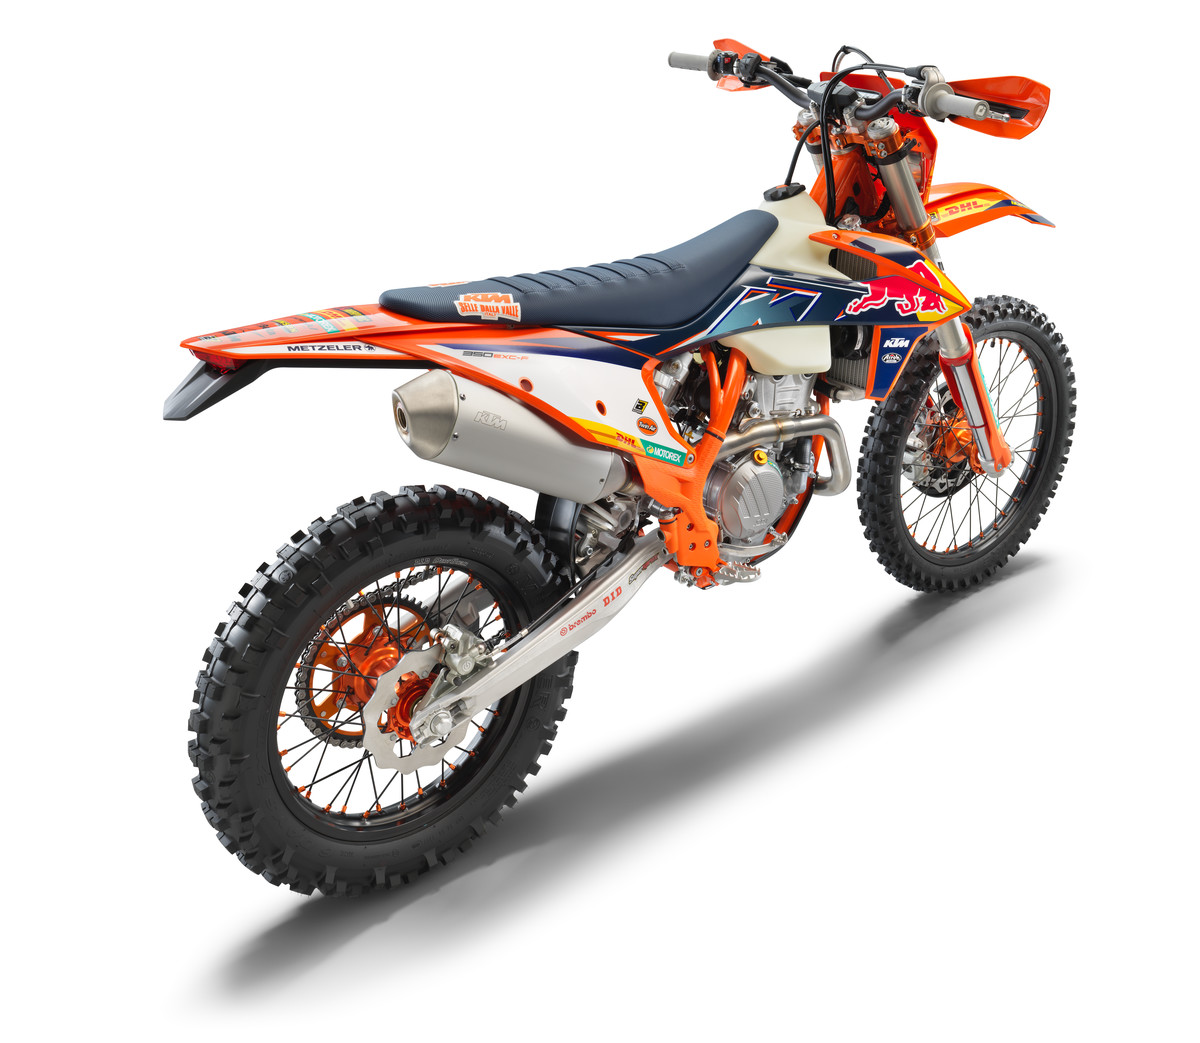 RAMP-UP THE READY TO RACE ATTITUDE WITH THE 2022 KTM 350 EXC-F FACTORY  EDITION - KTM PRESS CENTER